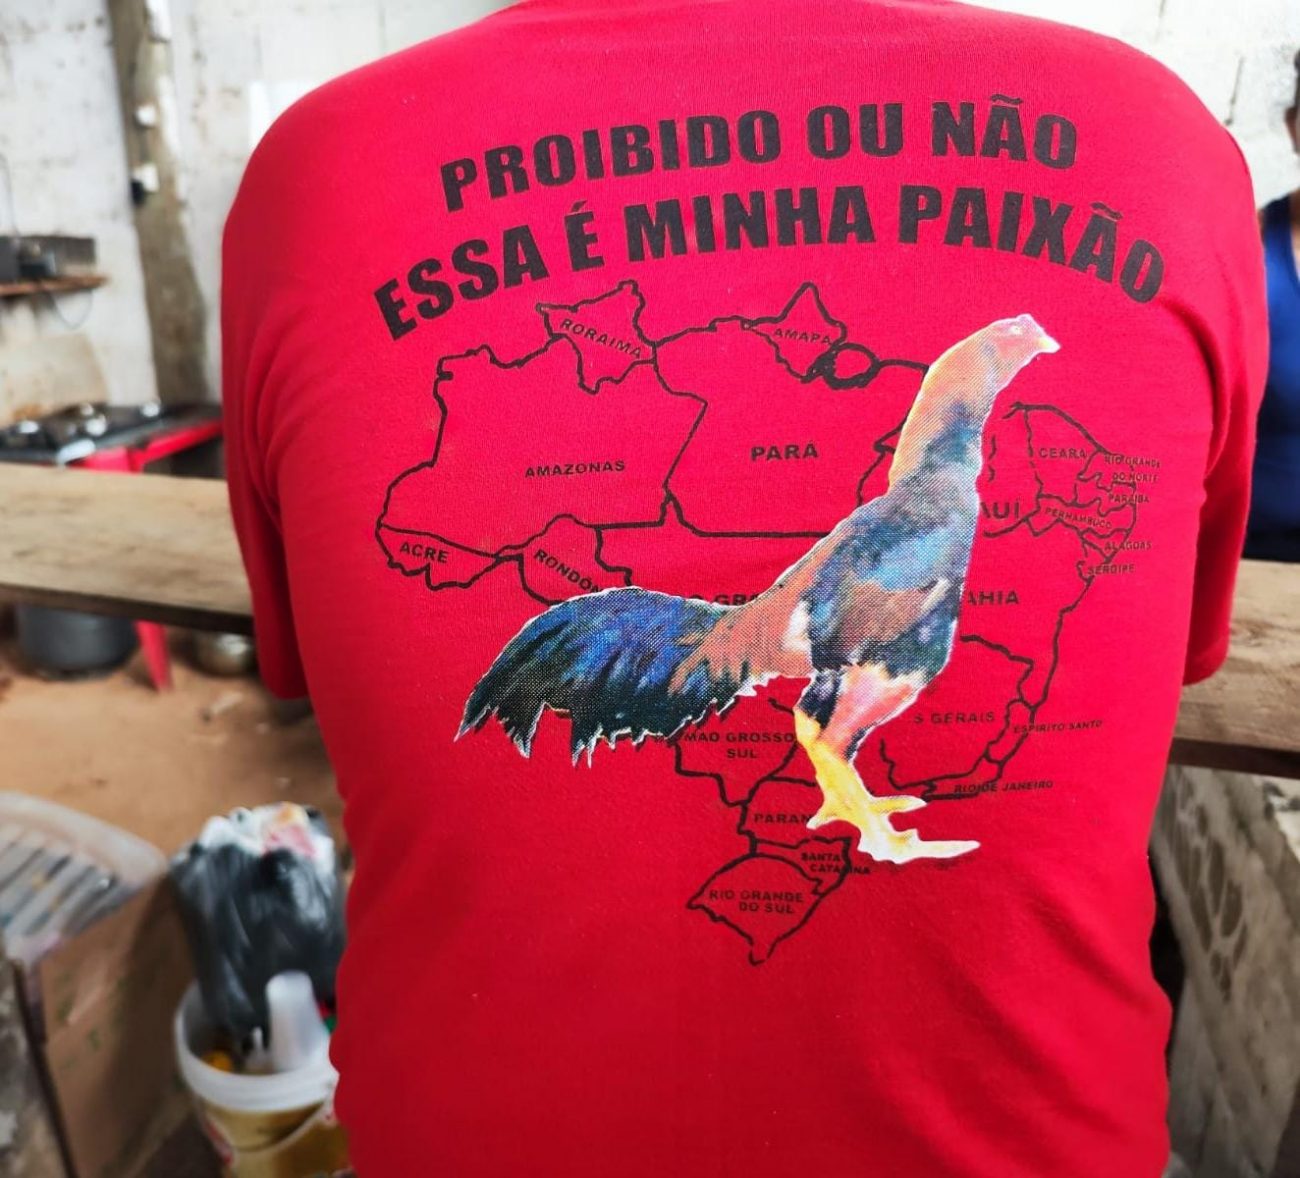 The man watching the fight was wearing a T-shirt promoting the practice - PMA/Reproduction/ND